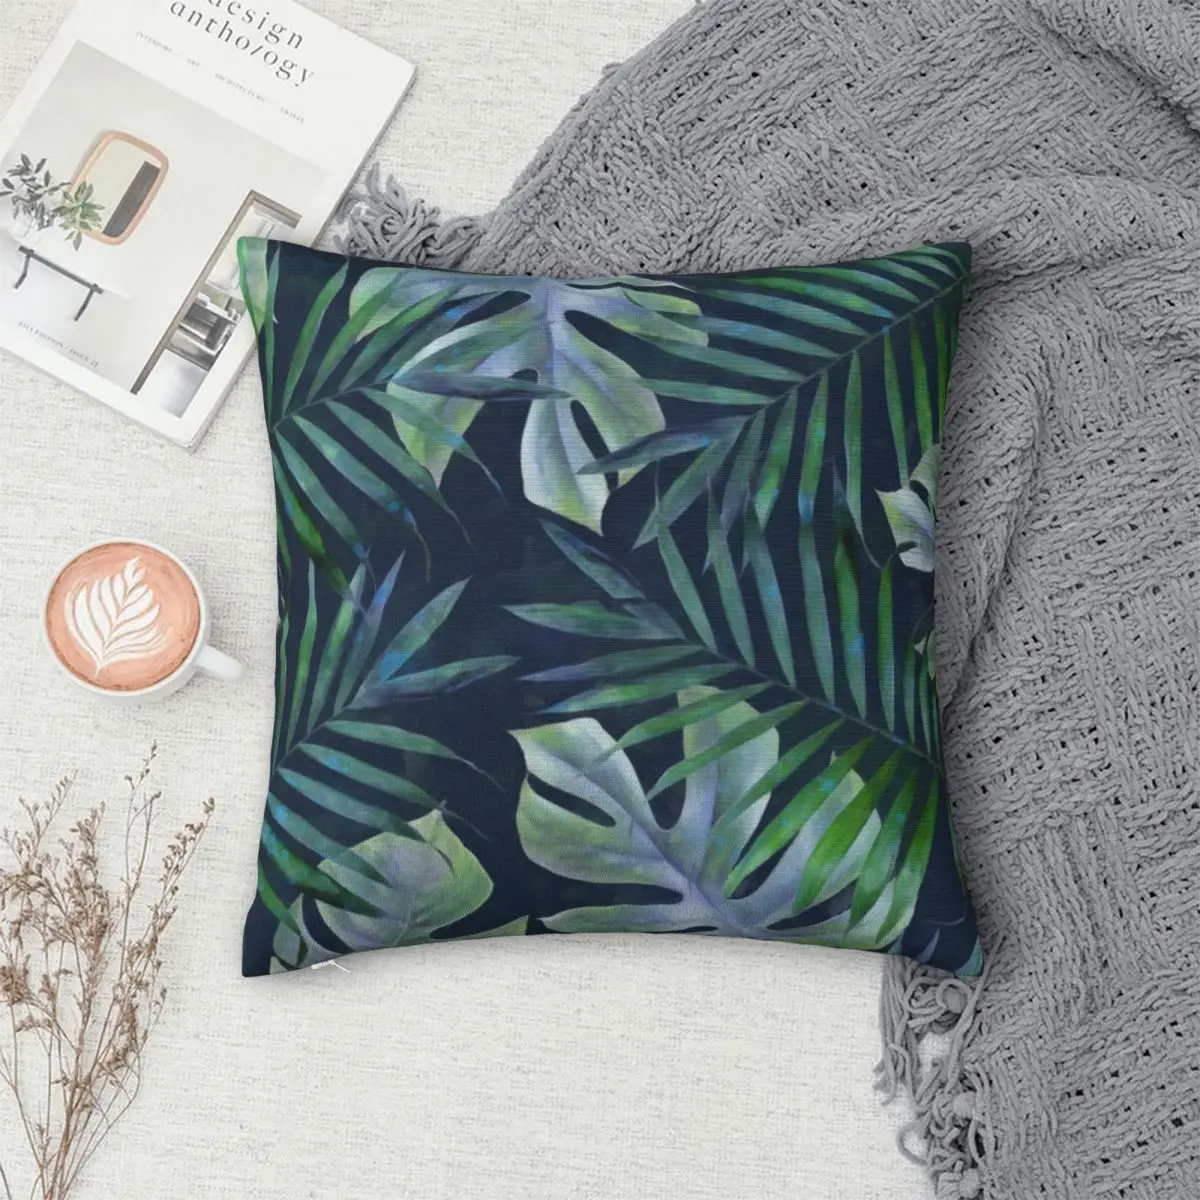 

Night Tropical Leaves Pillowcase Polyester Pillows Cover Cushion Comfort Throw Pillow Sofa Decorative Cushions Used for Home